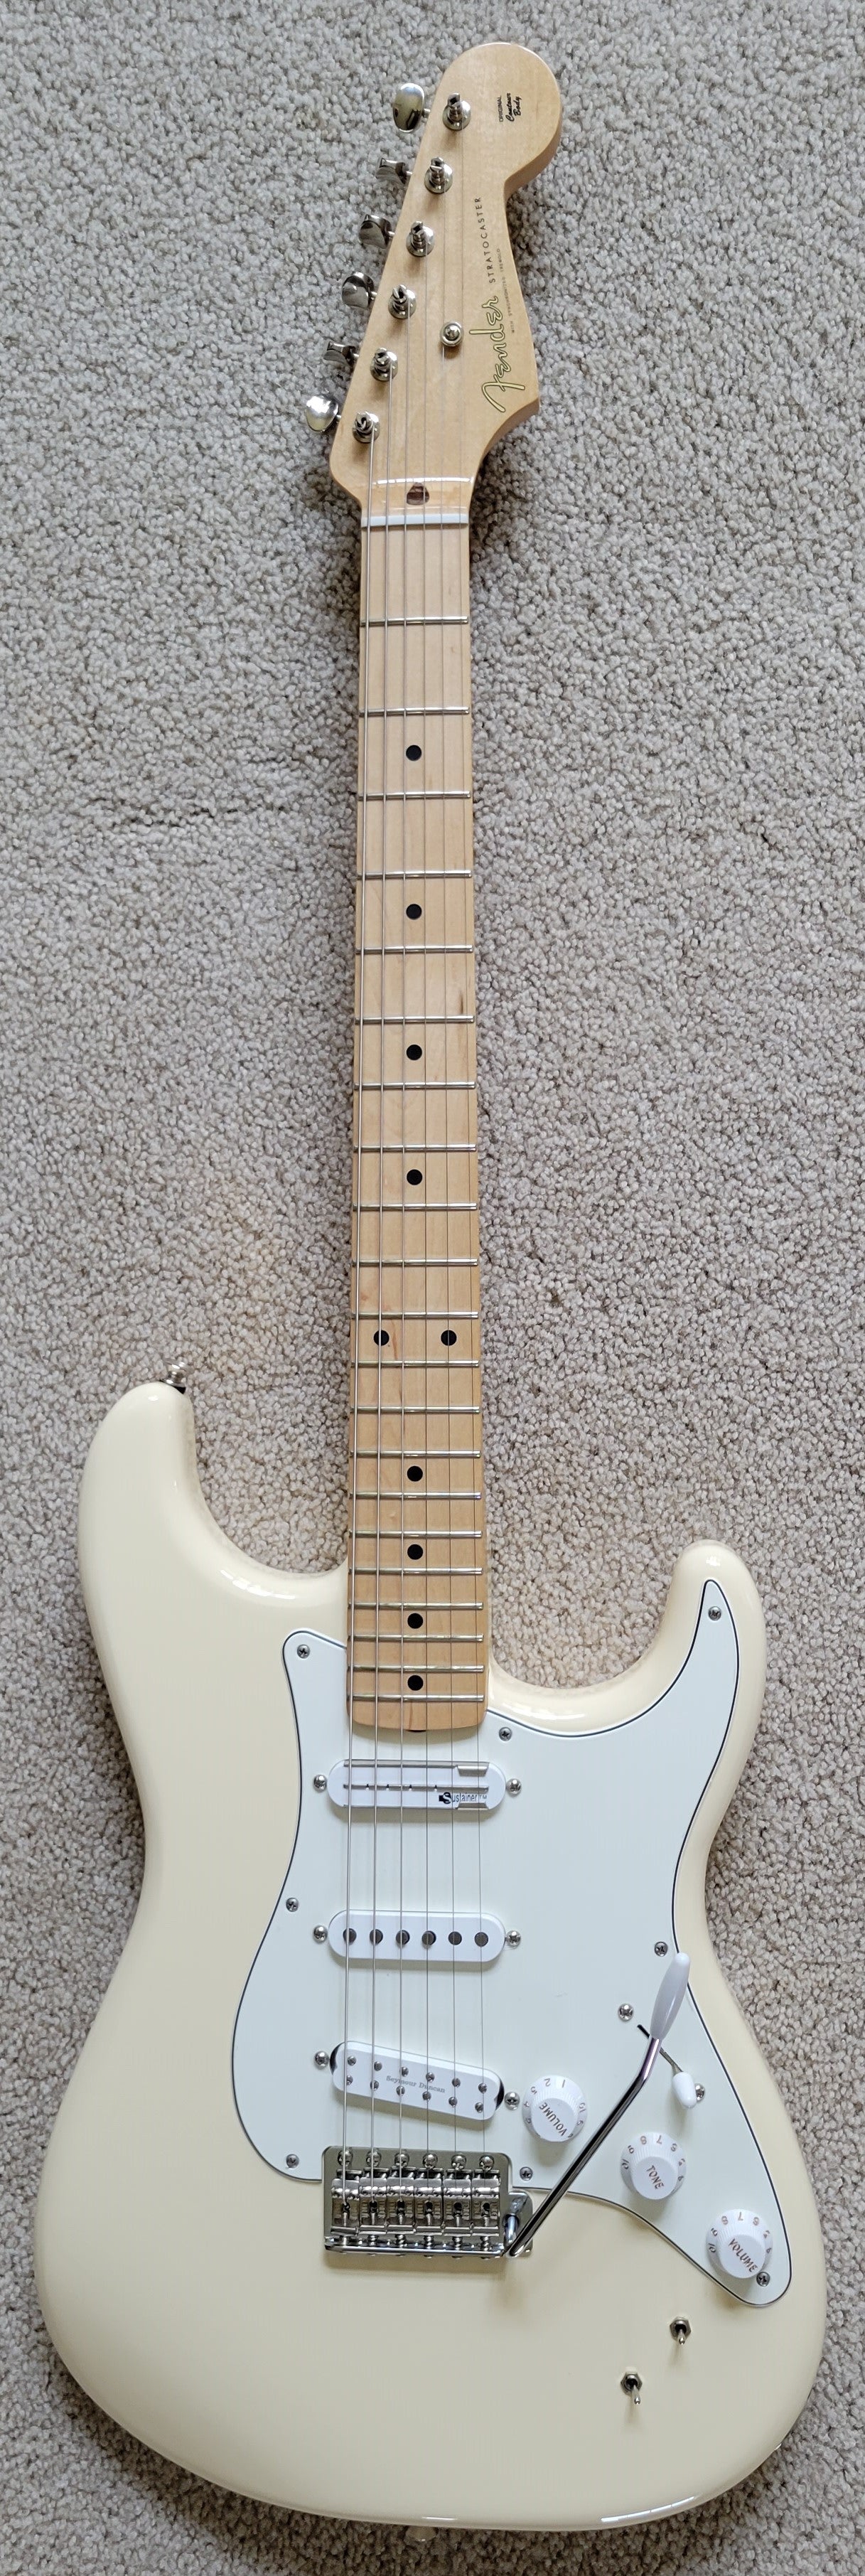 Fender EOB Sustainer Stratocaster Electric Guitar, Olympic White, New Gig Bag